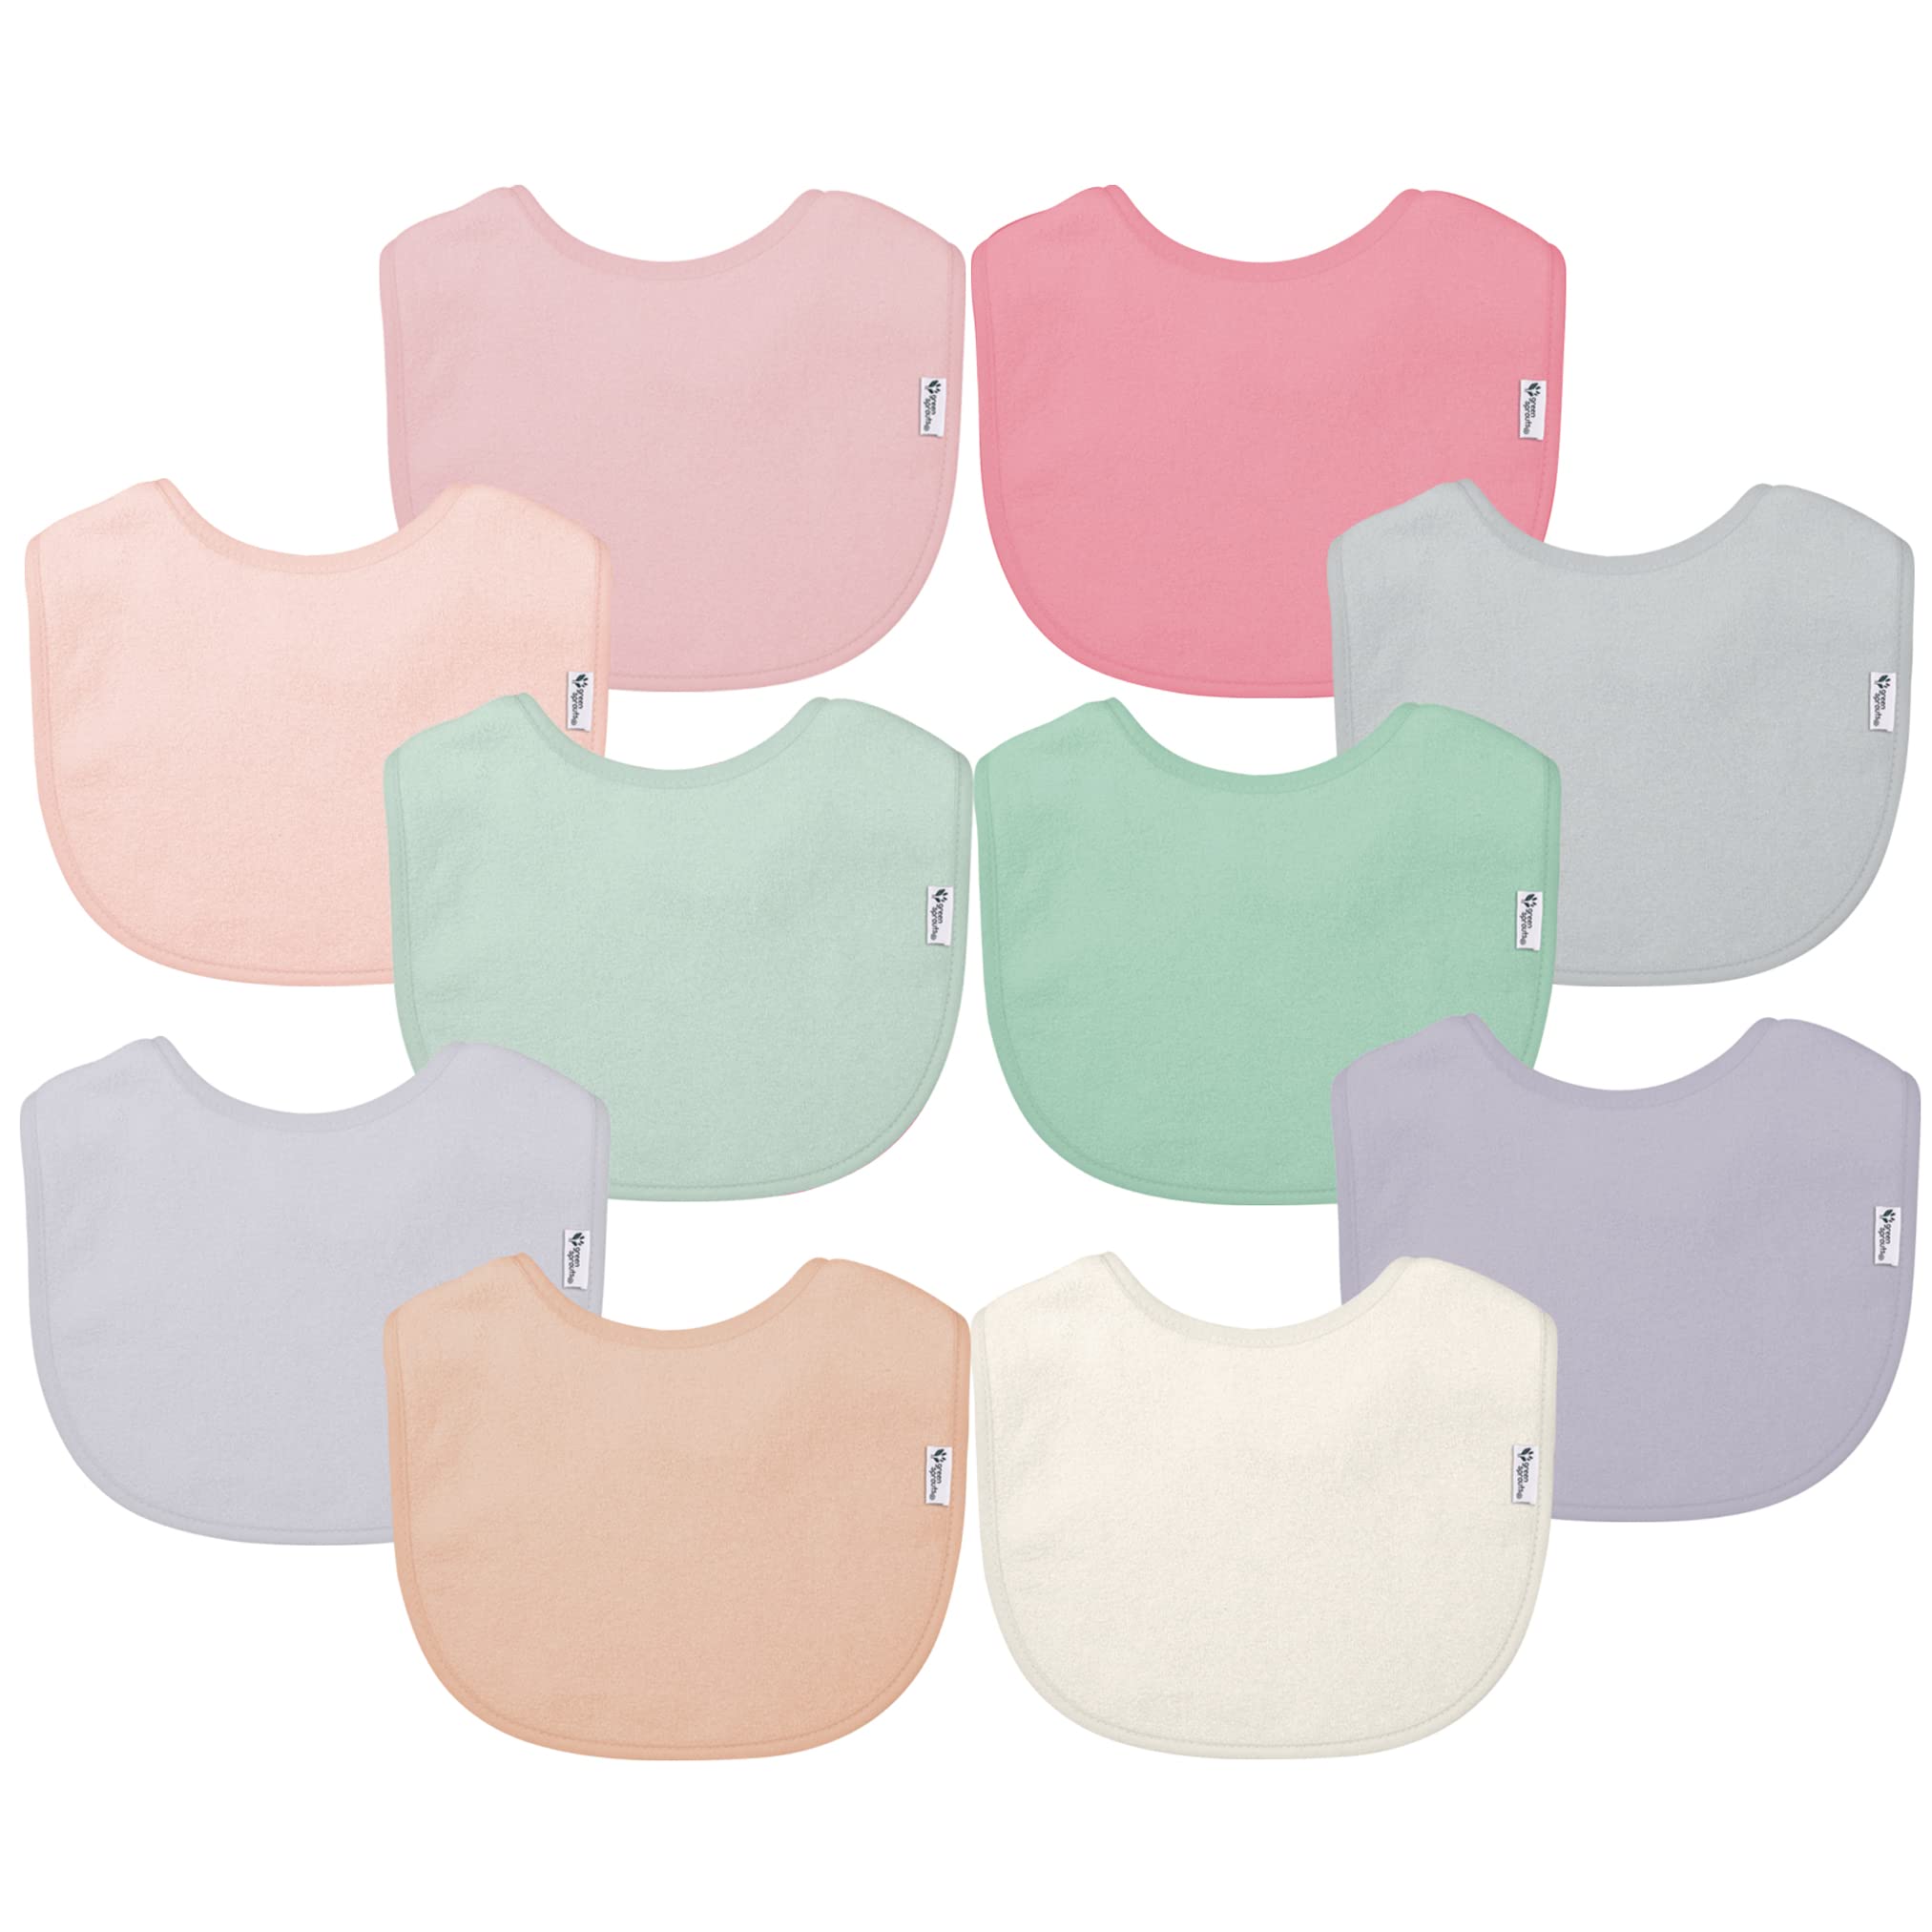 green sprouts Unisex Baby Stay-dry Infant Bibs, Rose